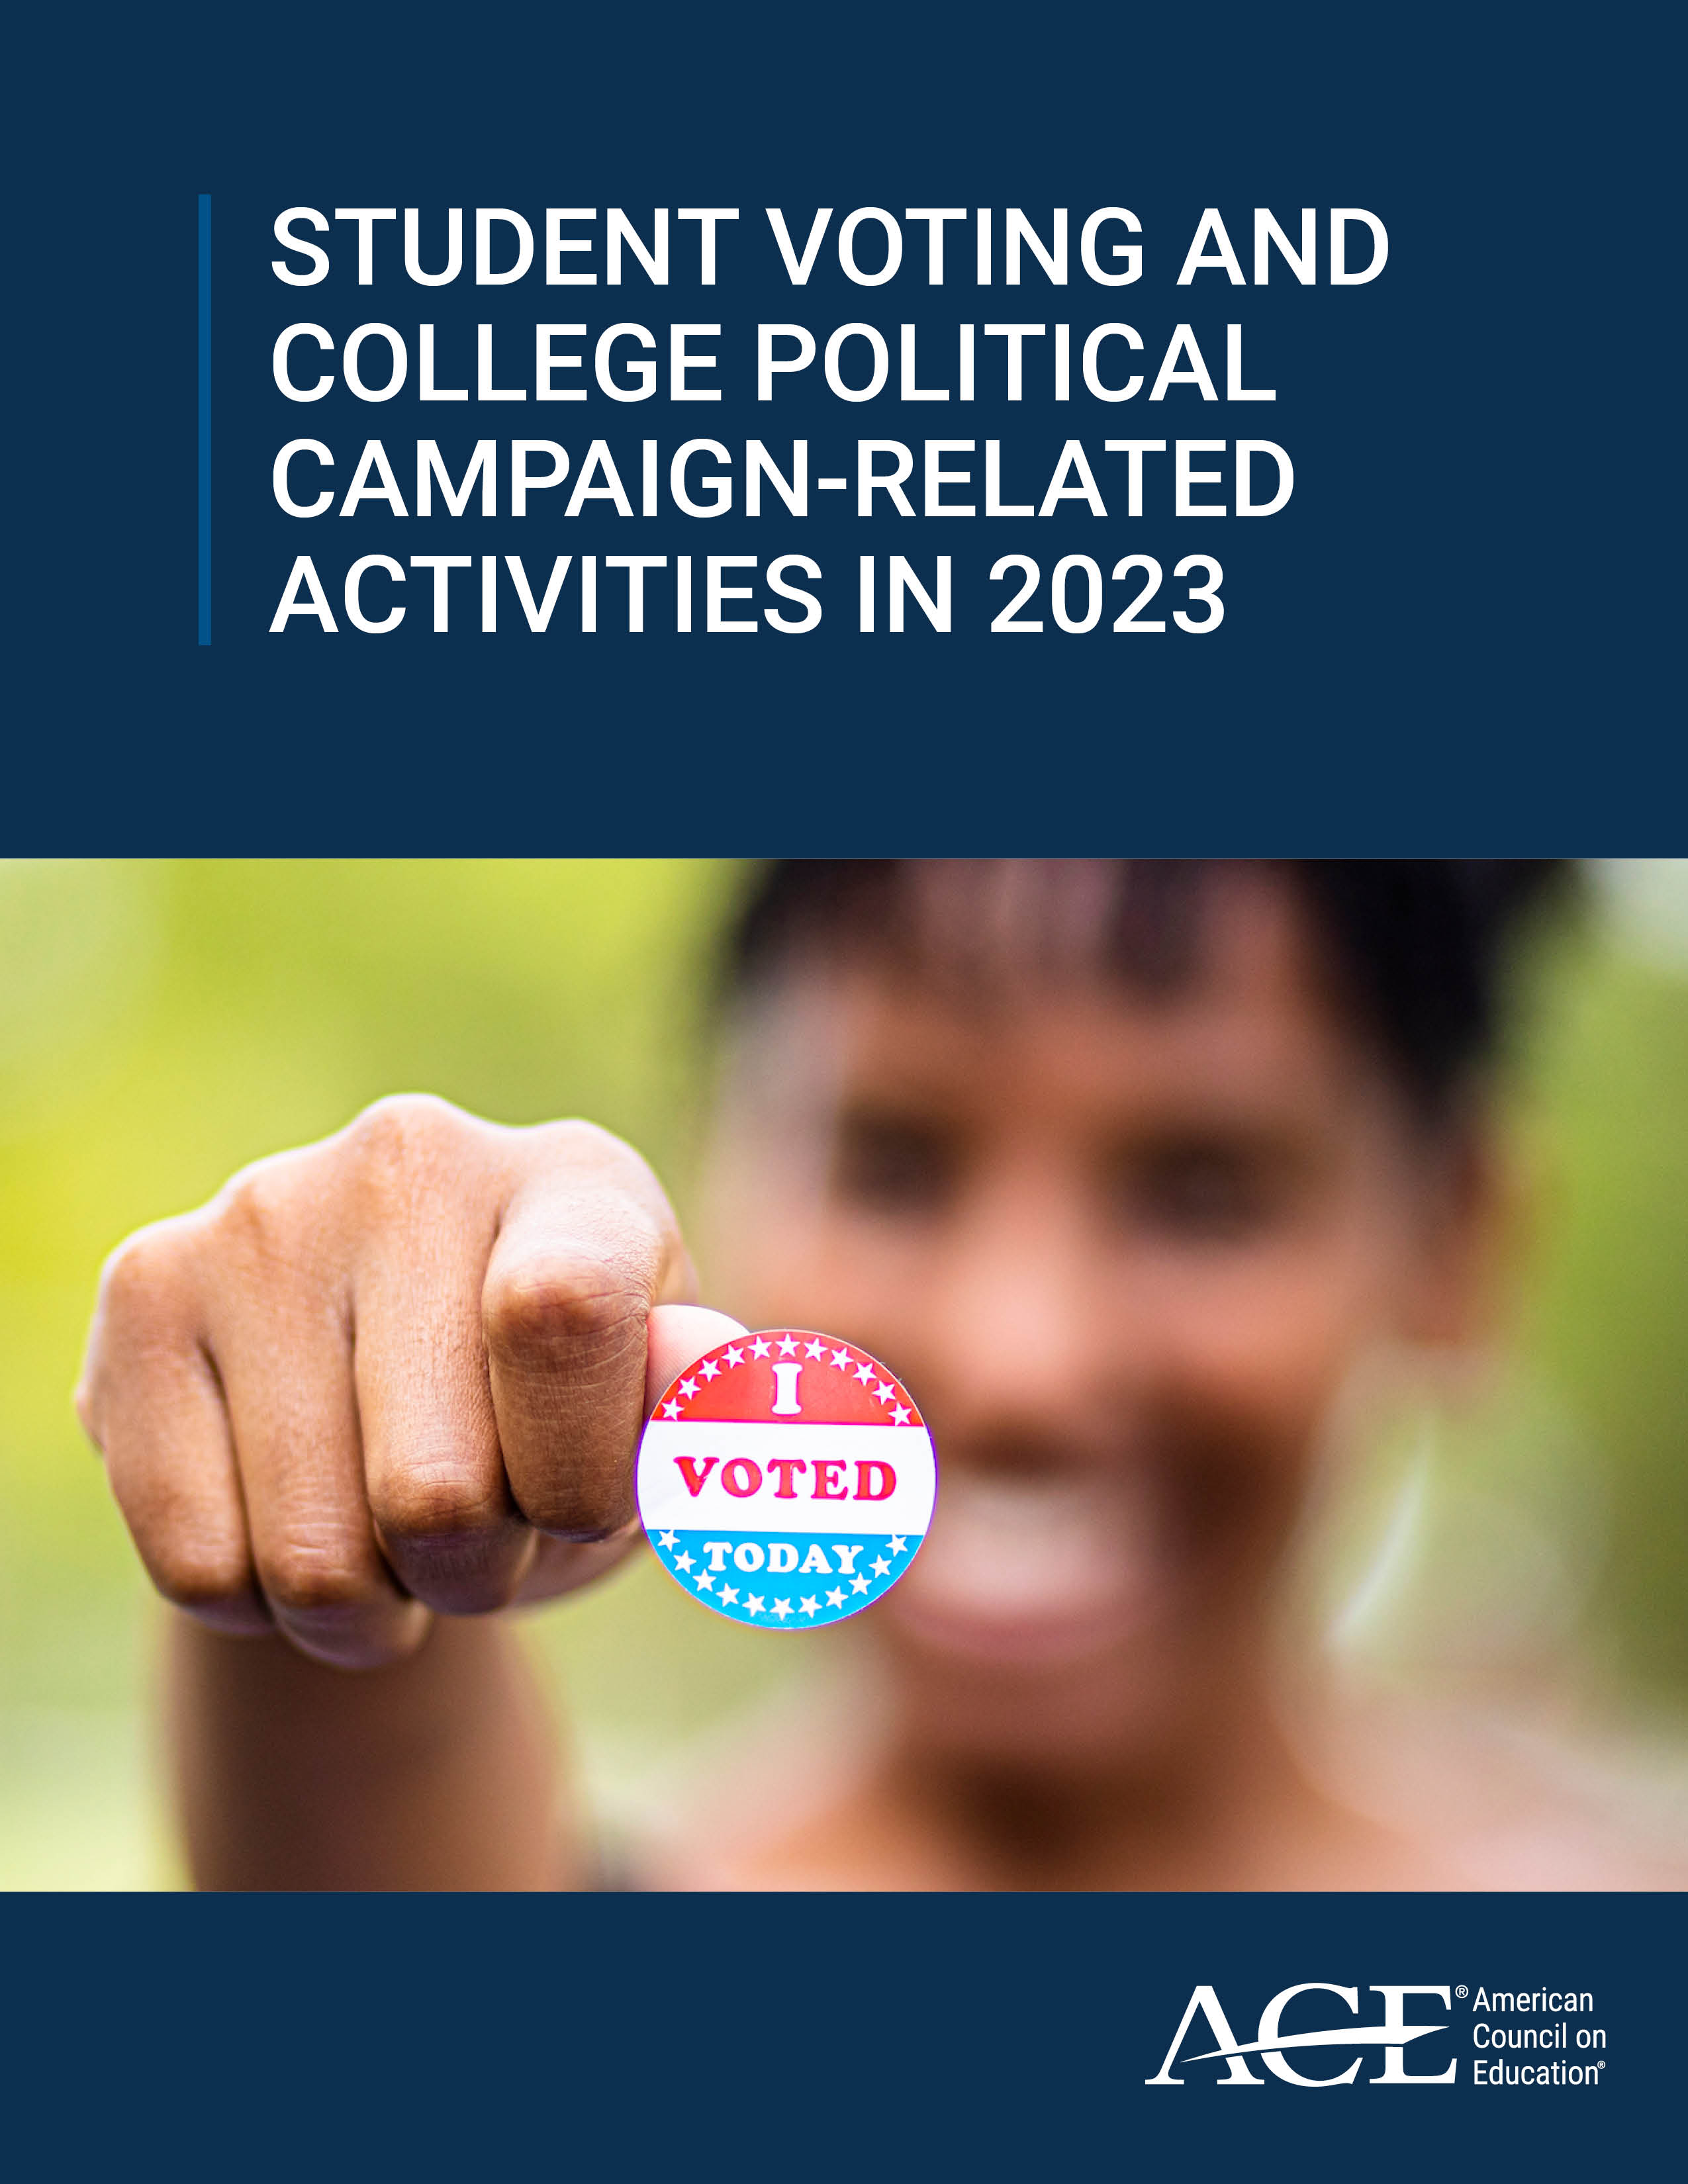 How Colleges Can Help Students Vote and What They Can (and Can’t) Do Regarding Campus Political Campaign-Related Activities